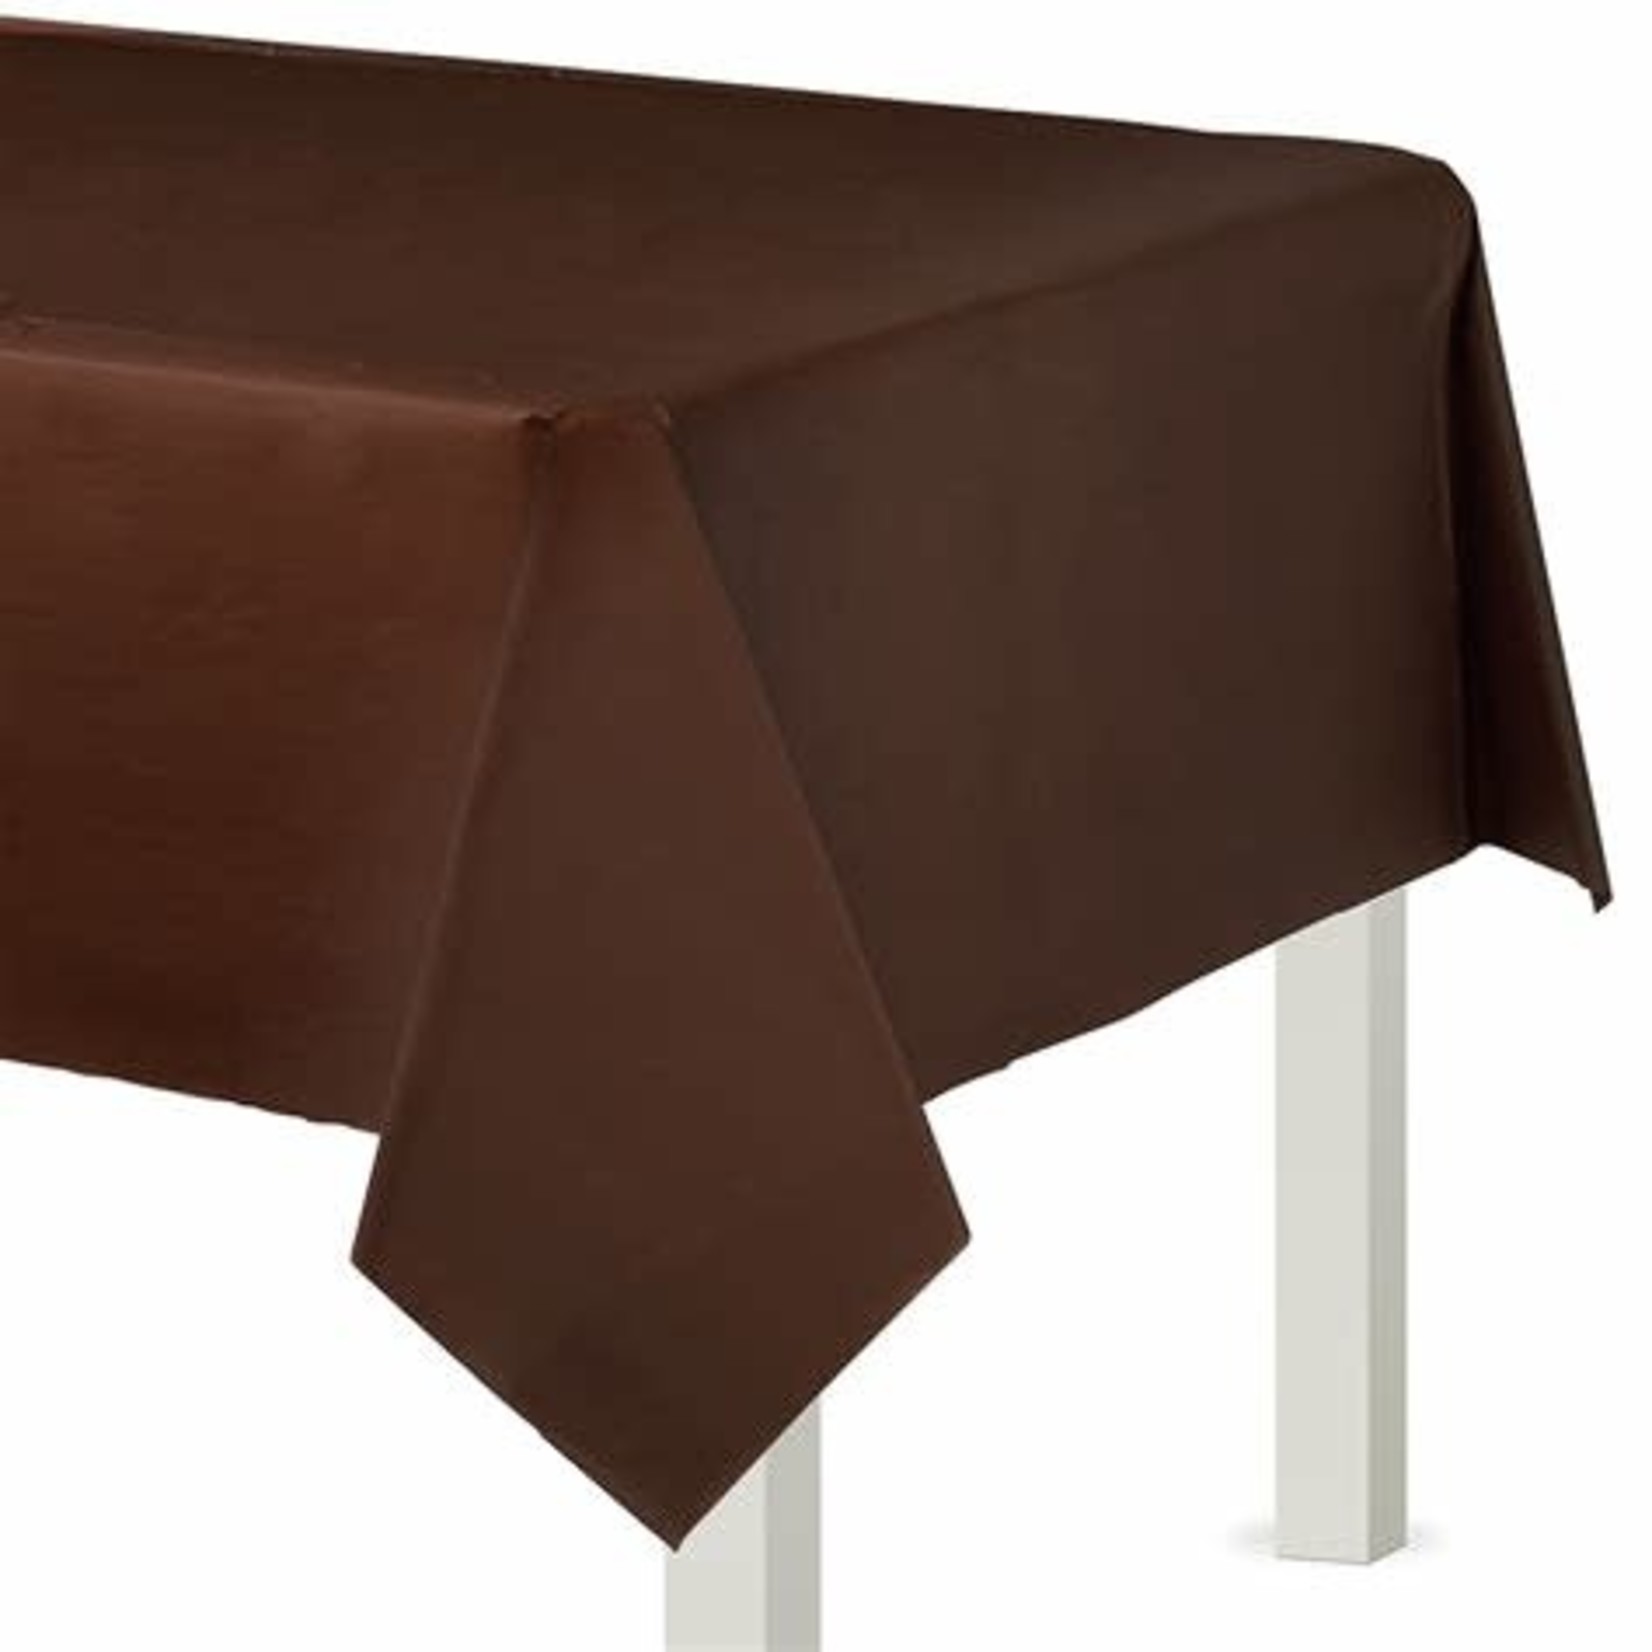 Brown Rectangular Table Cover